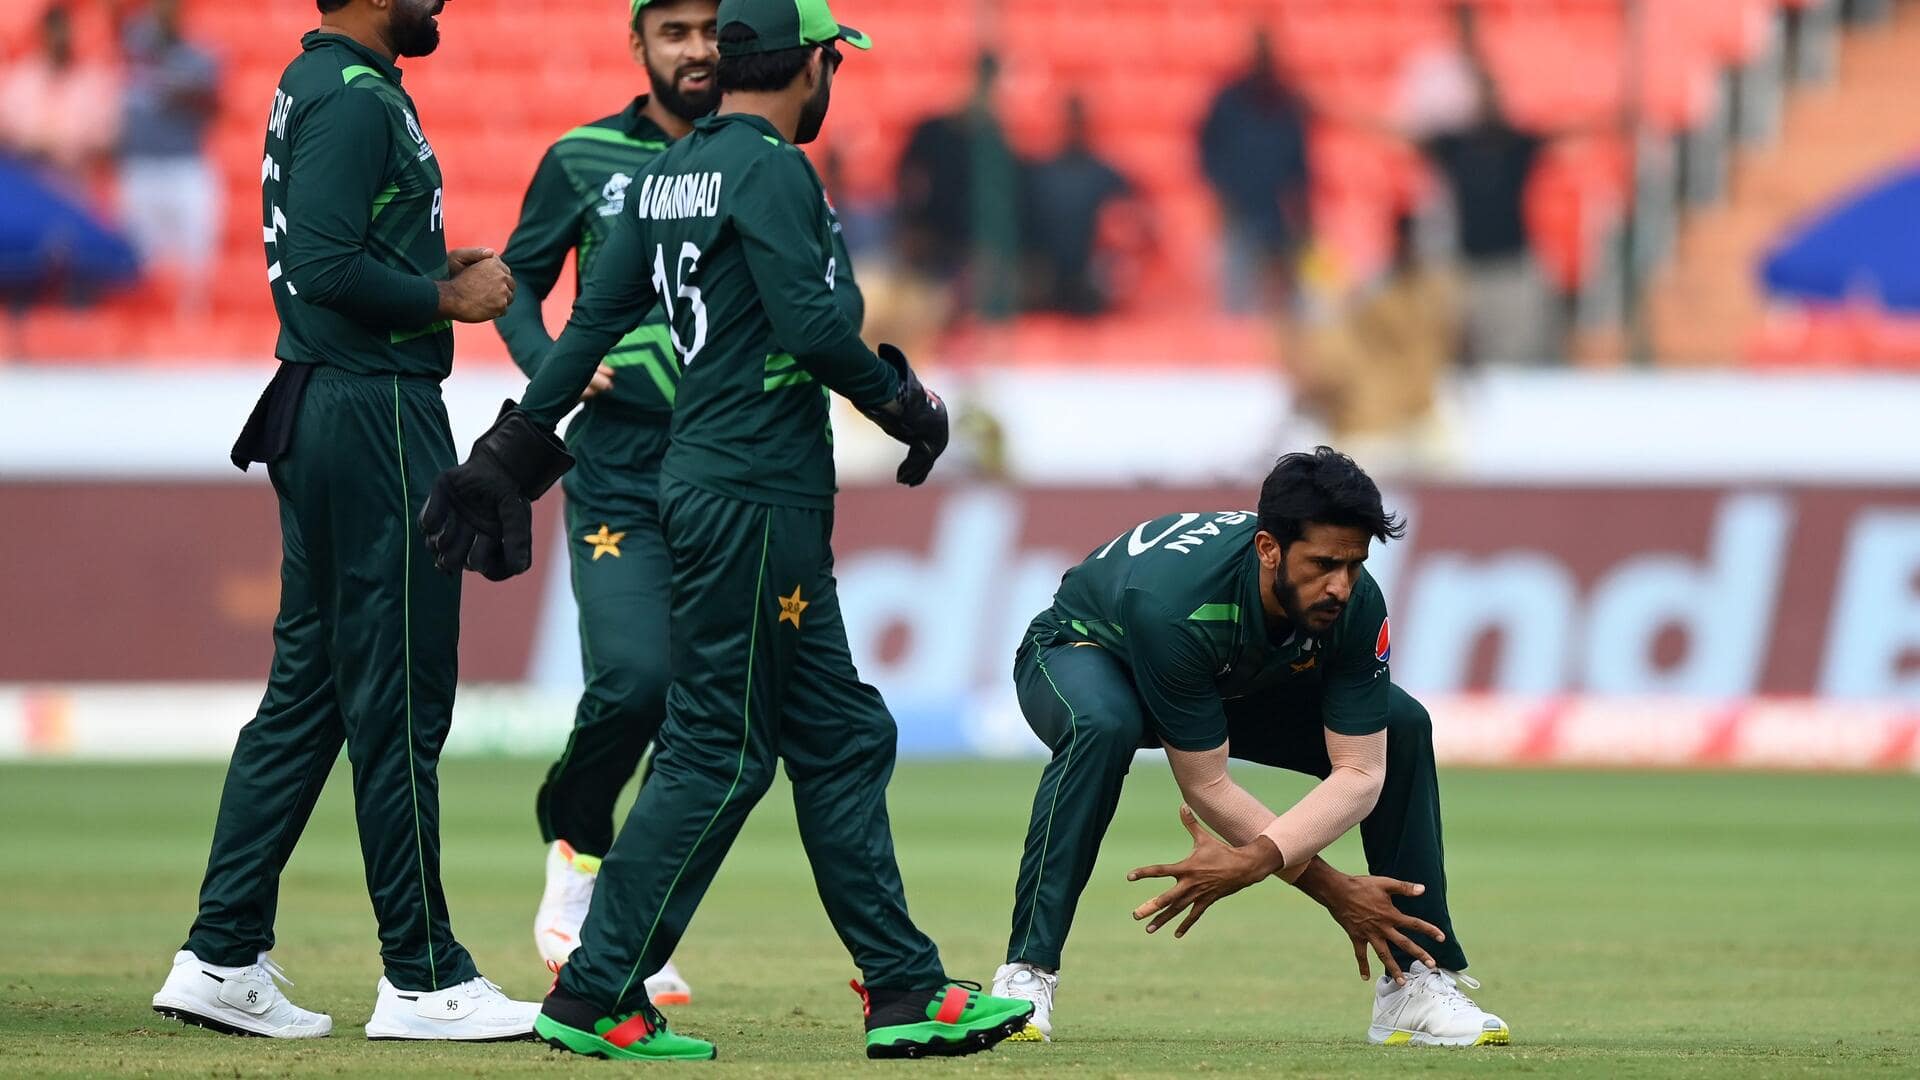 Pakistan's Hasan Ali takes his maiden four-fer in World Cup